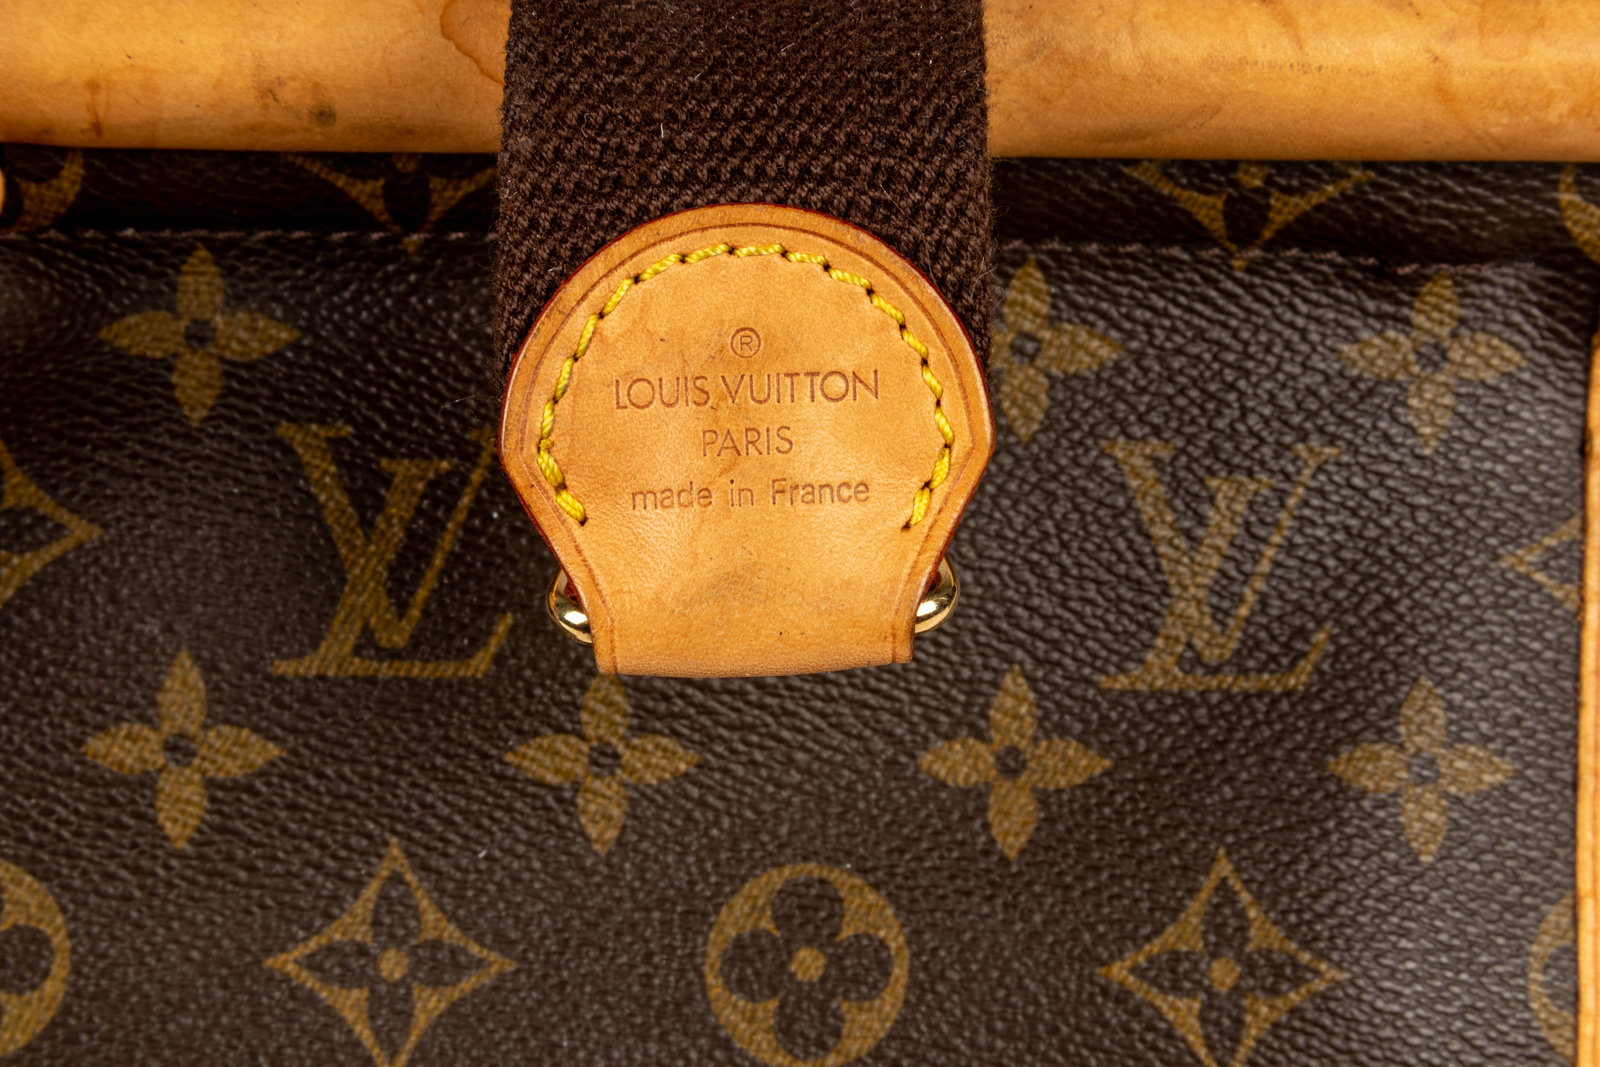 Sold at Auction: Hunting Sac Chasse Travel Bag, Louis Vuitton